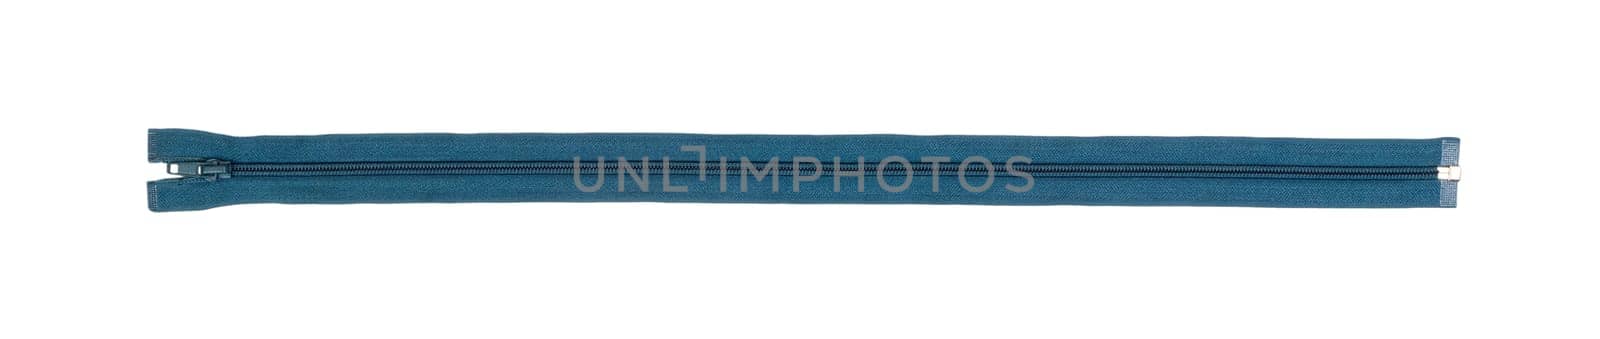 Blue zipper Isolated on white background. top view by Snegok1967